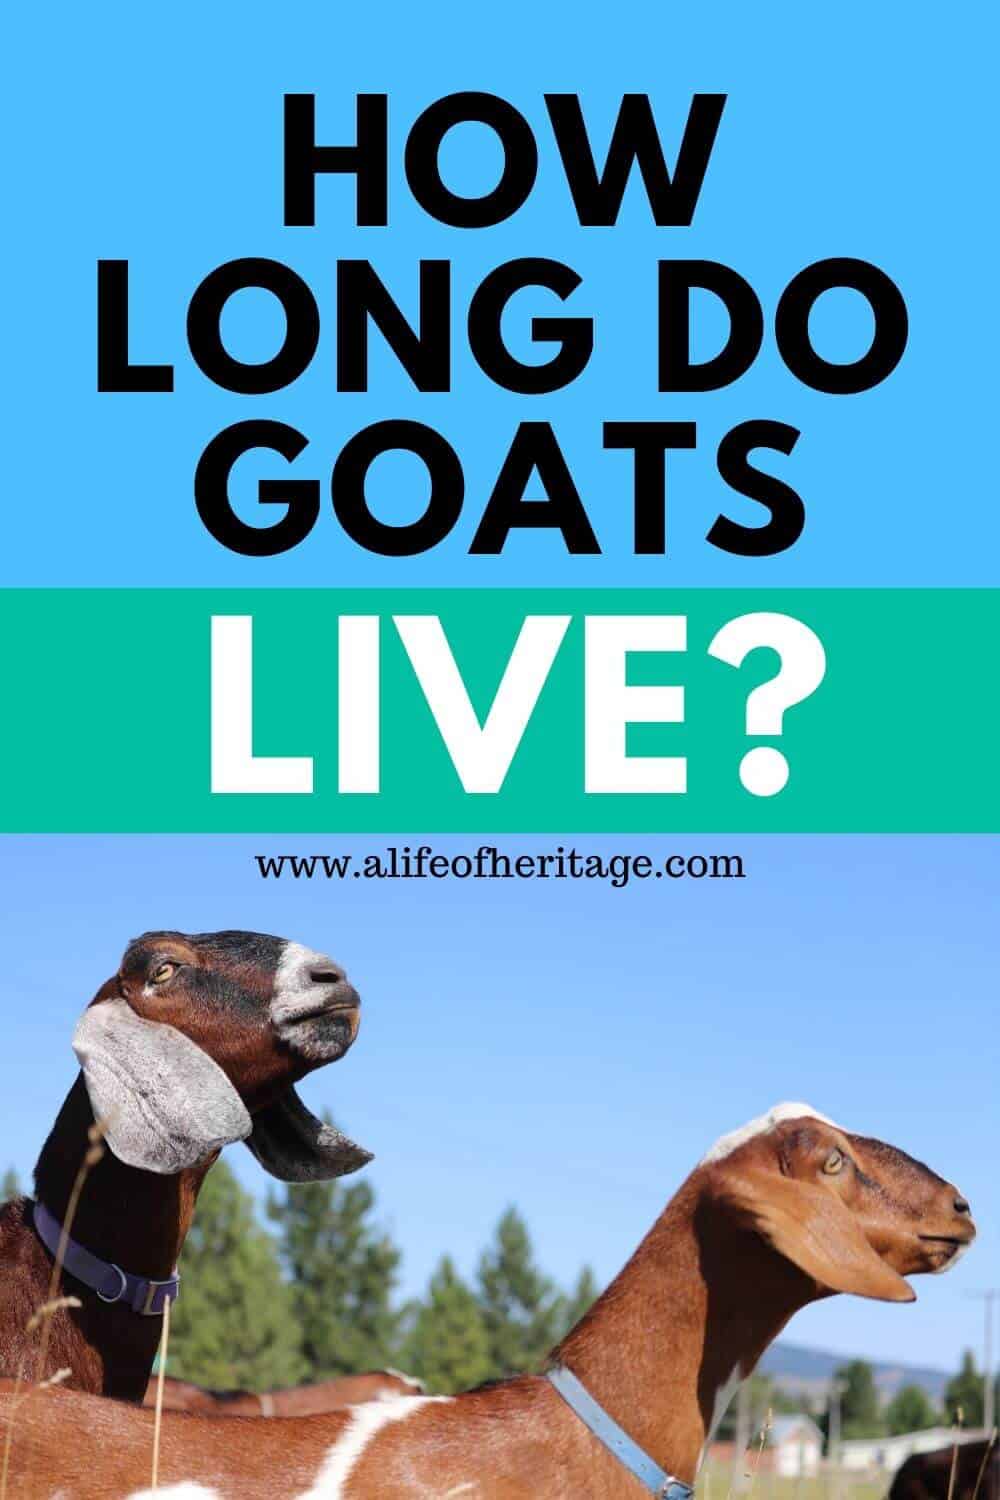 How Long Do Goats Live? Your Guide to a Goat's Lifespan